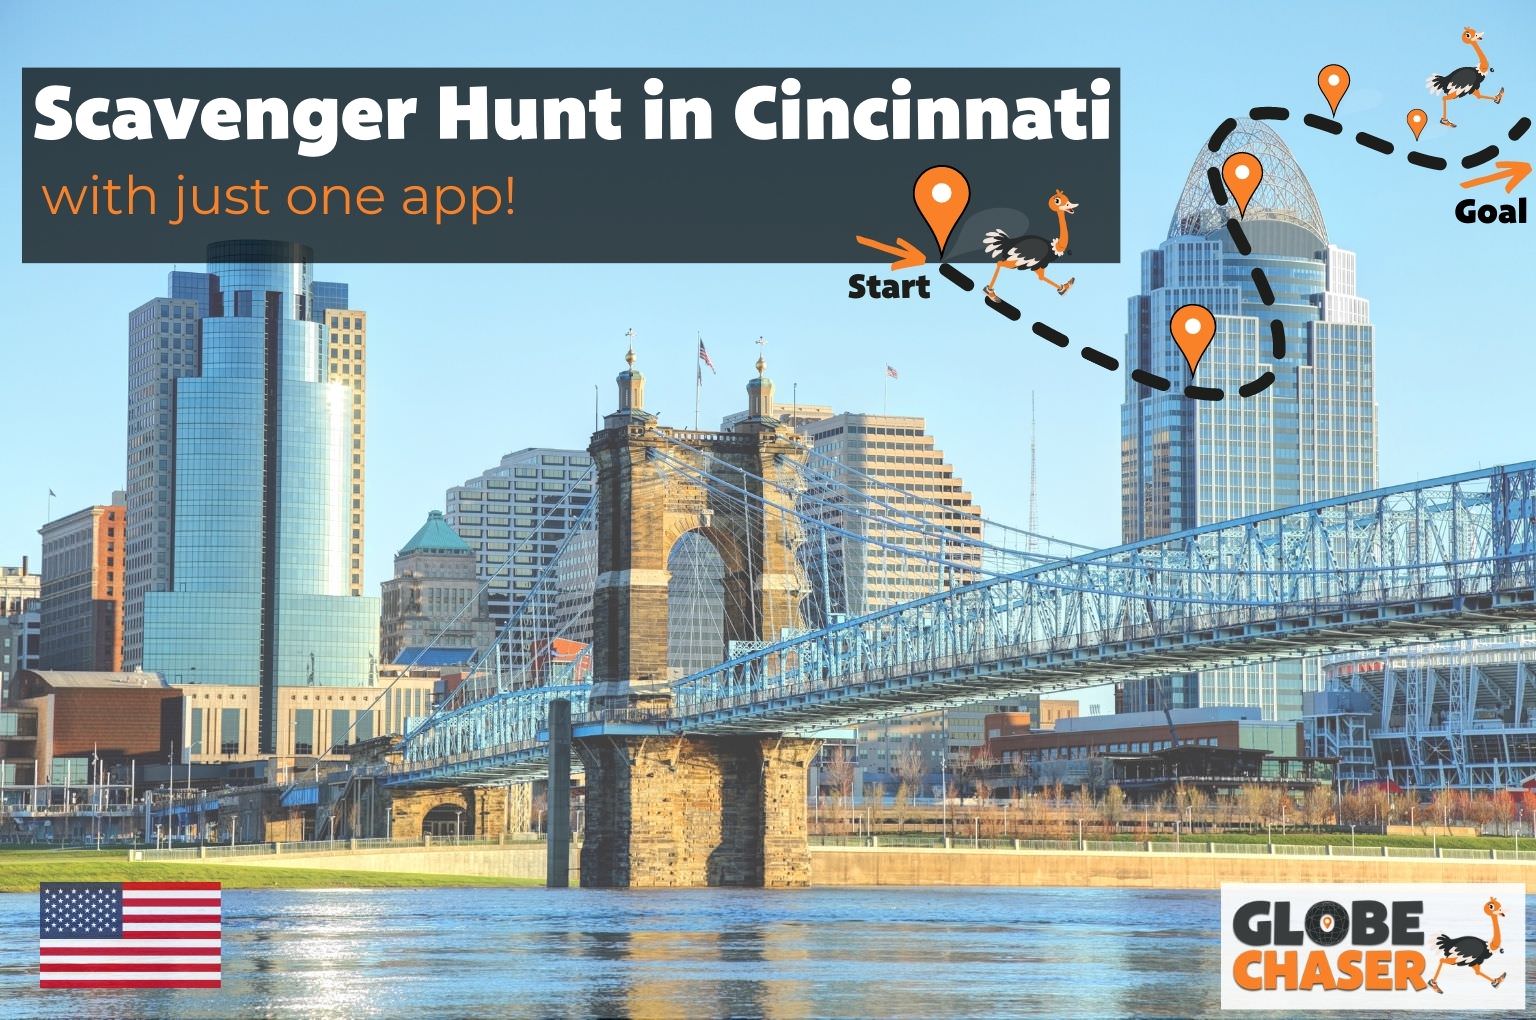 Scavenger Hunt in Cincinnati, USA - Family Activities with the Globe Chaser App for Outdoor Fun